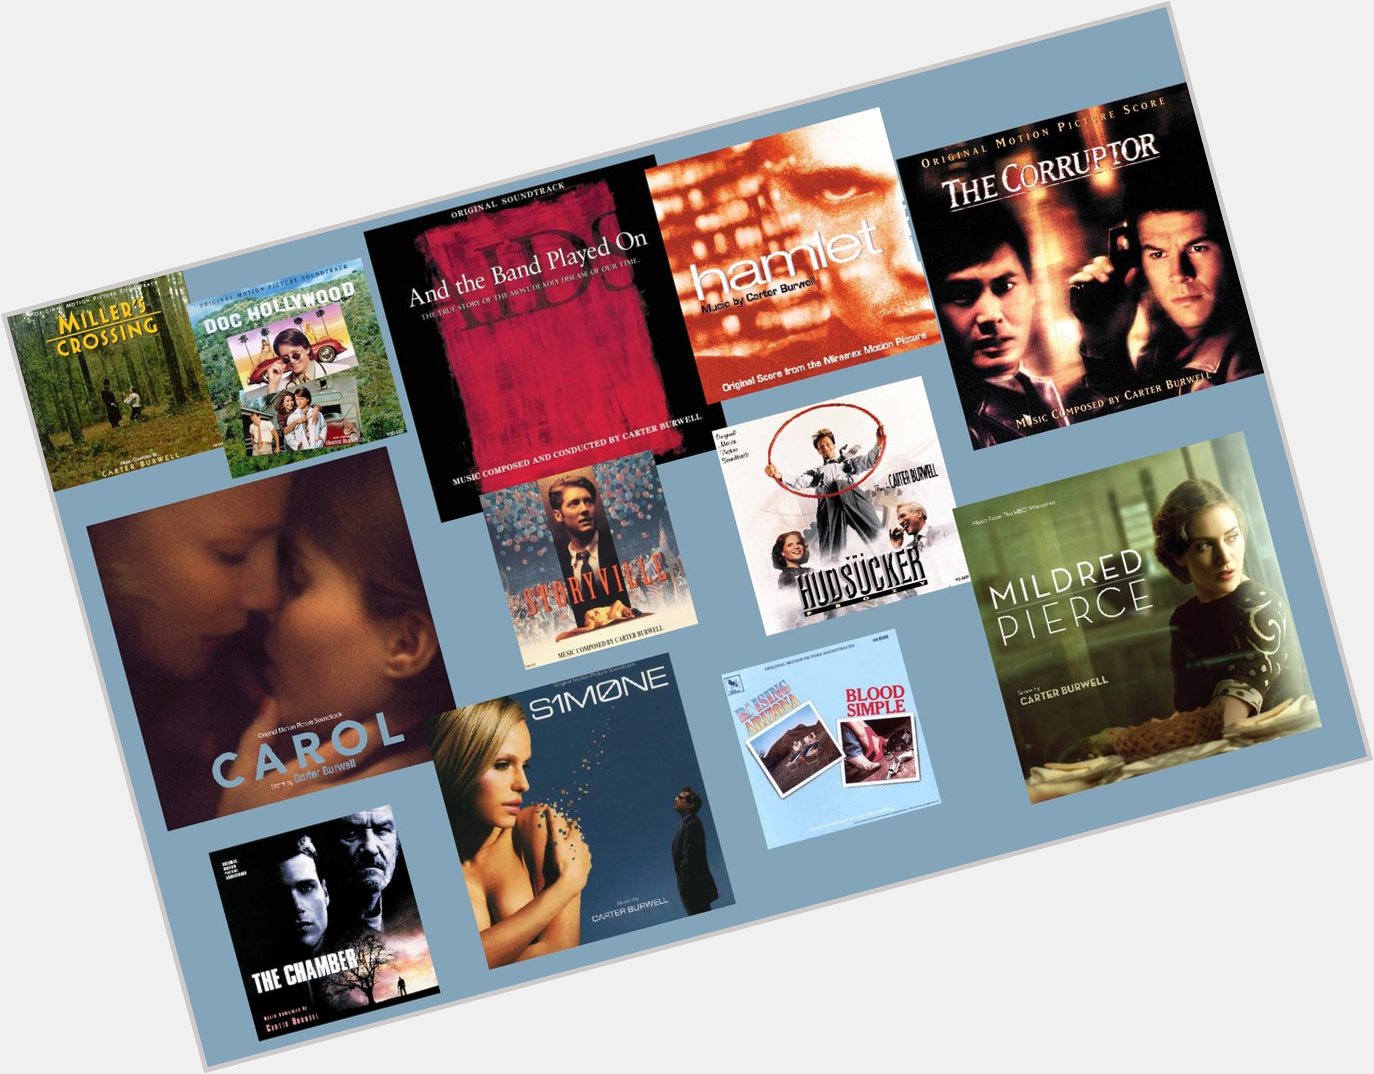 Happy Birthday Carter Burwell - We re excited to release your Carol Soundtrack this week!  